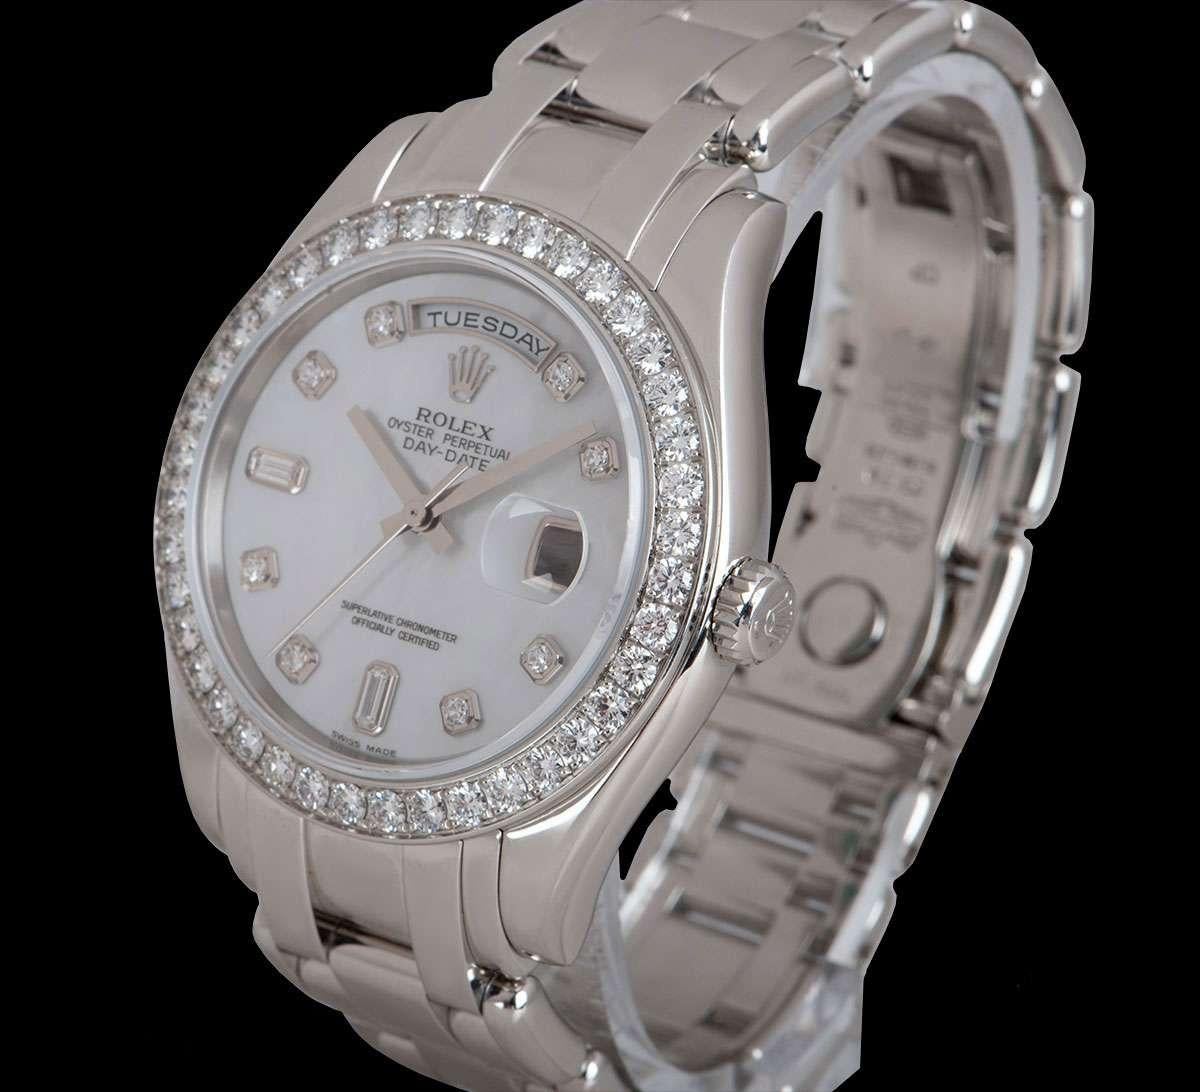 A 39 mm Platinum Oyster Perpetual Day-Date Masterpiece Gents Wristwatch, white mother of pearl dial set with 8 applied round brilliant cut diamond hour markers and 2 applied baguette cut diamond hour markers, day at 12 0'clock, date at 3 0'clock, a